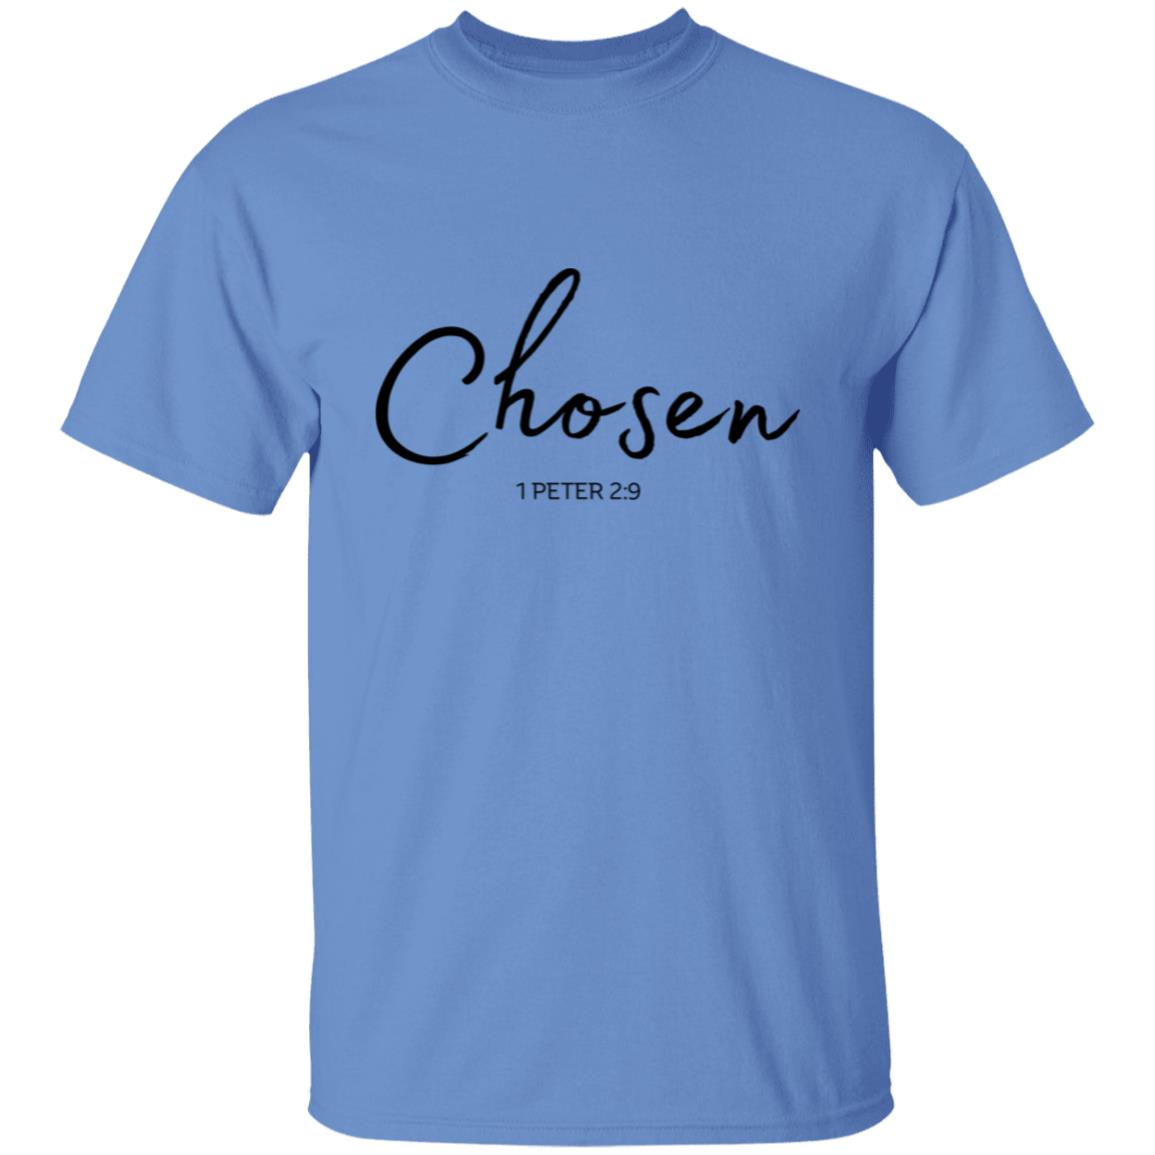 Get trendy with Chosen (2) Chosen (1 Peter 5:9) T-Shirt Words of Faith Series (Black Text) - T-Shirts available at Good Gift Company. Grab yours for $21.95 today!